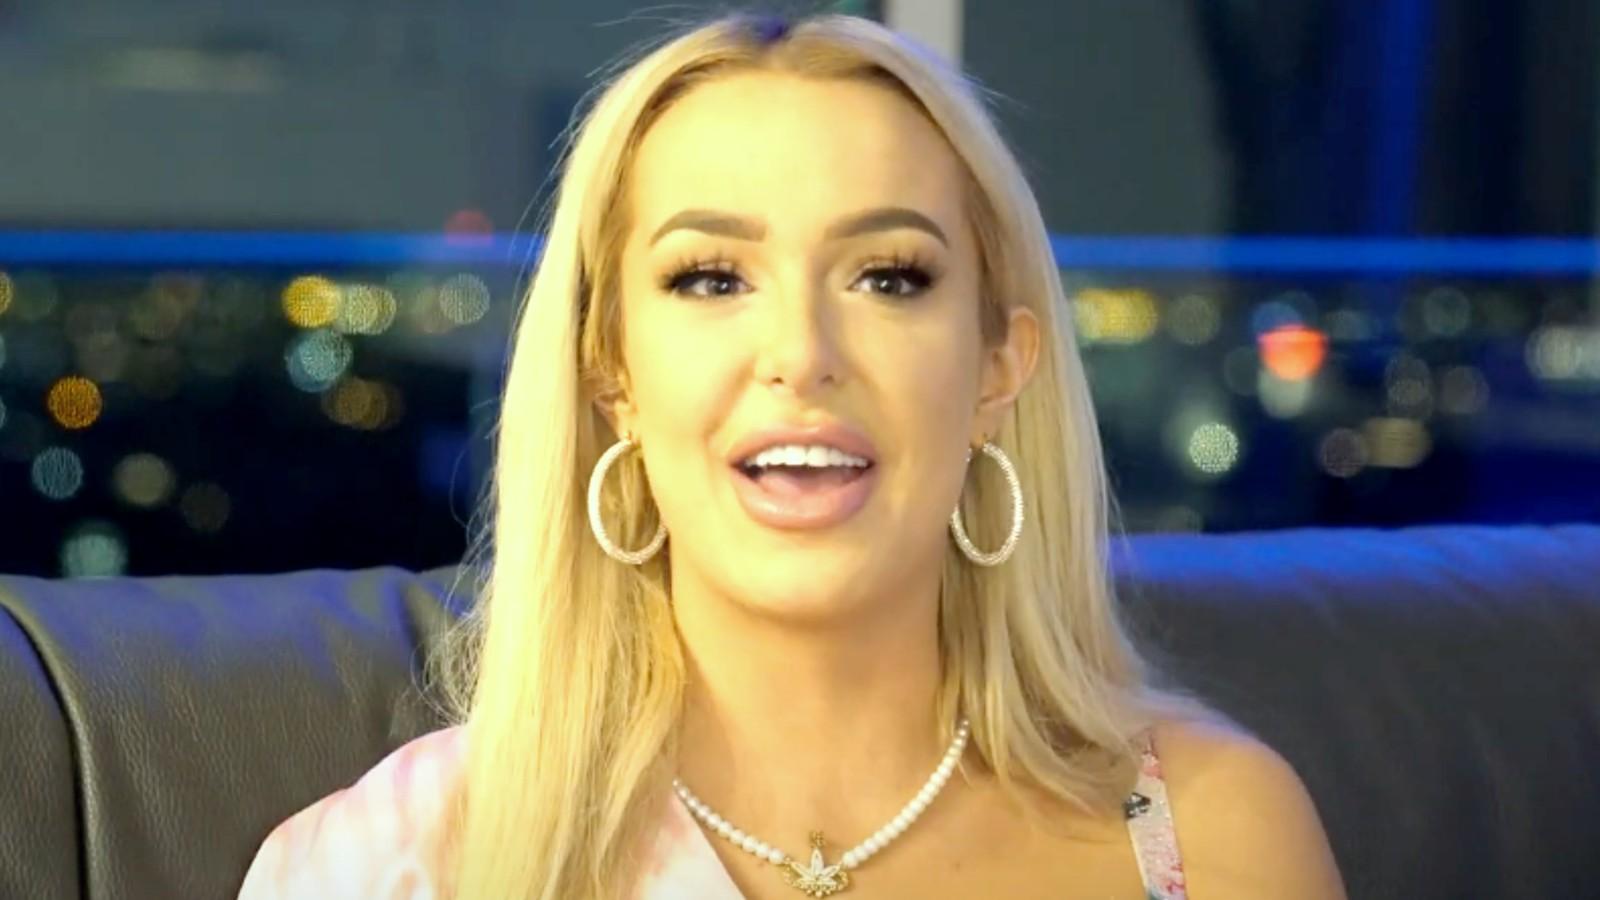 Tana Mongeau sits facing the camera in a storytime video